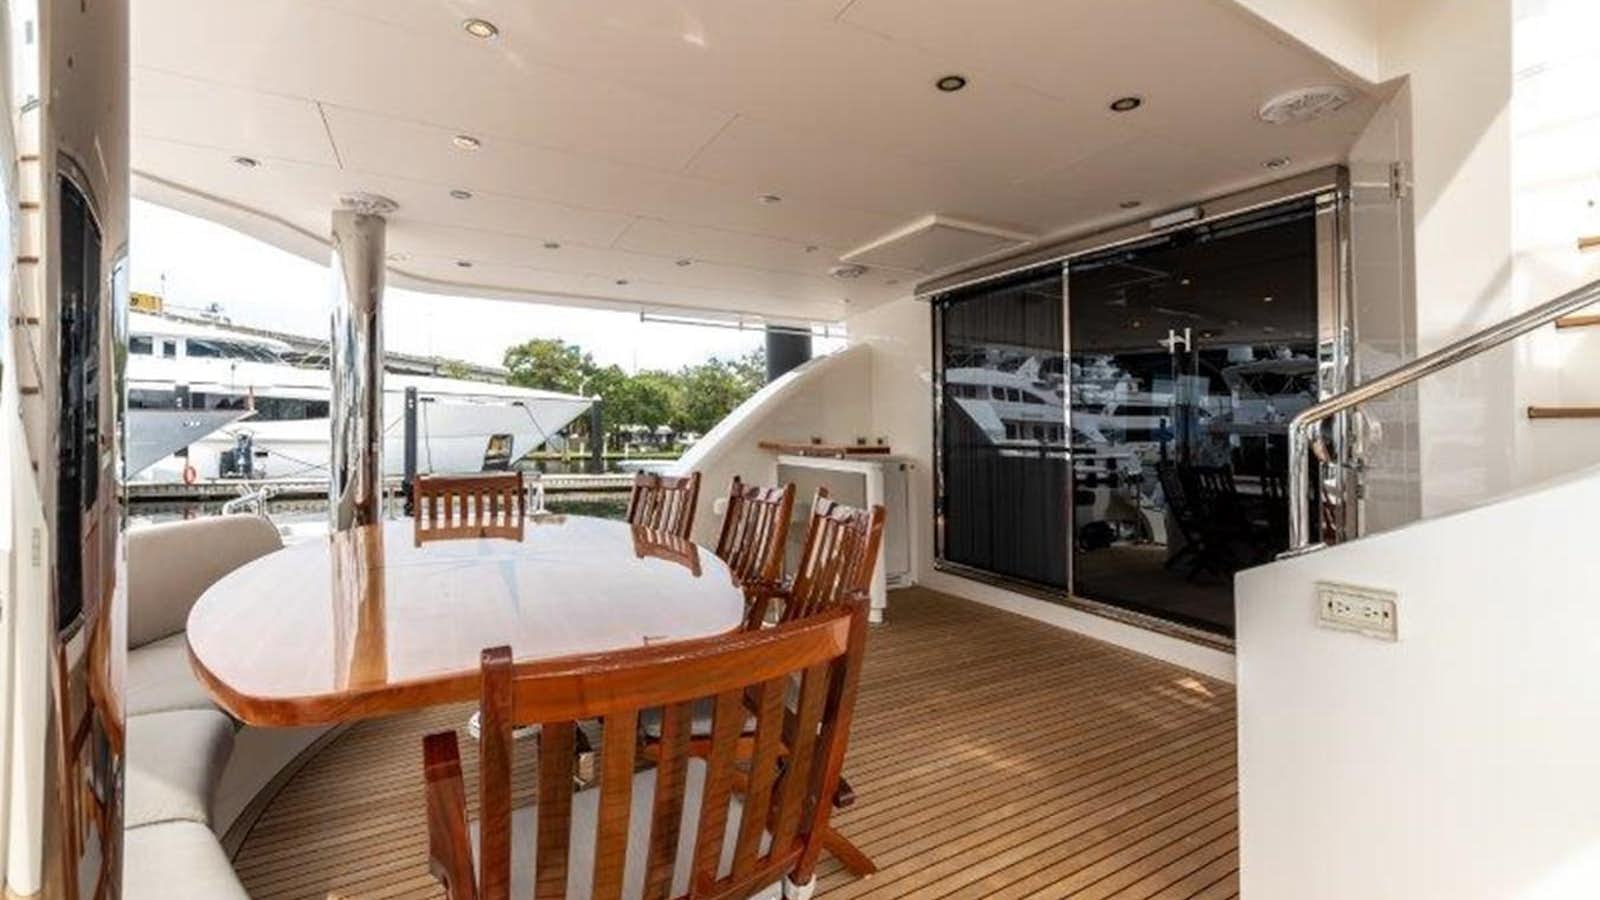 101' hargrave
Yacht for Sale